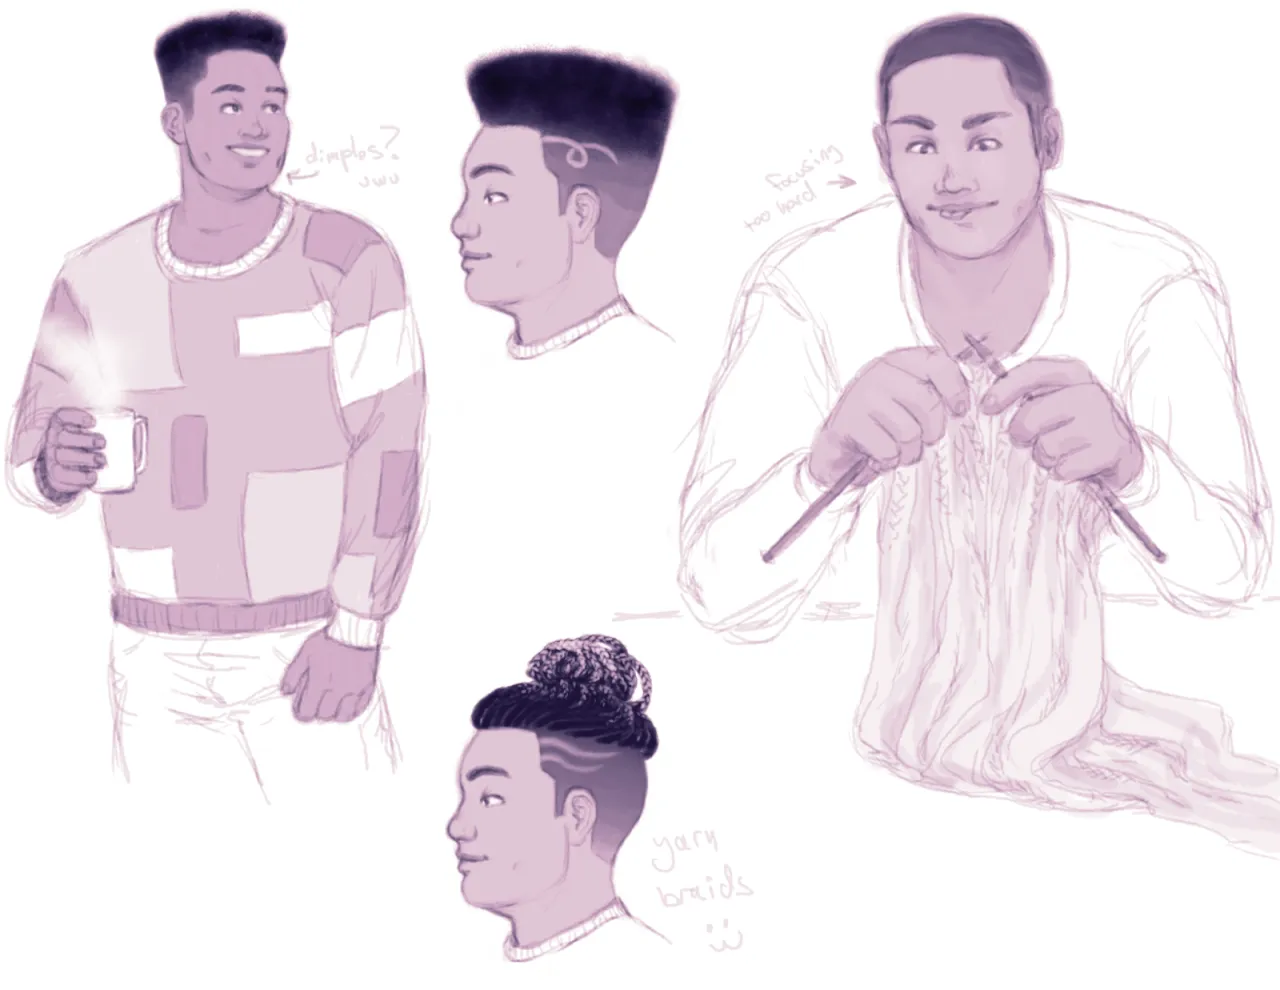 Sketches of the unreleased FujoGuide character [Redacted]. He has a thicc build, a medium-dark skin tone, and tightly curled black hair shown in different styles. On the left is a nearly full-body drawing of him wearing a patchwork sweater, smiling, with a flat top hair style, and holding a steaming mug. The artist’s notes read “dimples? uwu”. In the middle are two side profiles with hair ideas: the top one has a flat top with fade hair style and the bottom one has box braids on top with a fade. The artist’s notes read “yarn braids :3”. On the right is a drawing of him knitting with his elbows on the table and his tongue sticking out in focus mode. He is wearing a white long-sleeve shirt and a very short hairstyle. The artist’s notes read “focusing too hard”.